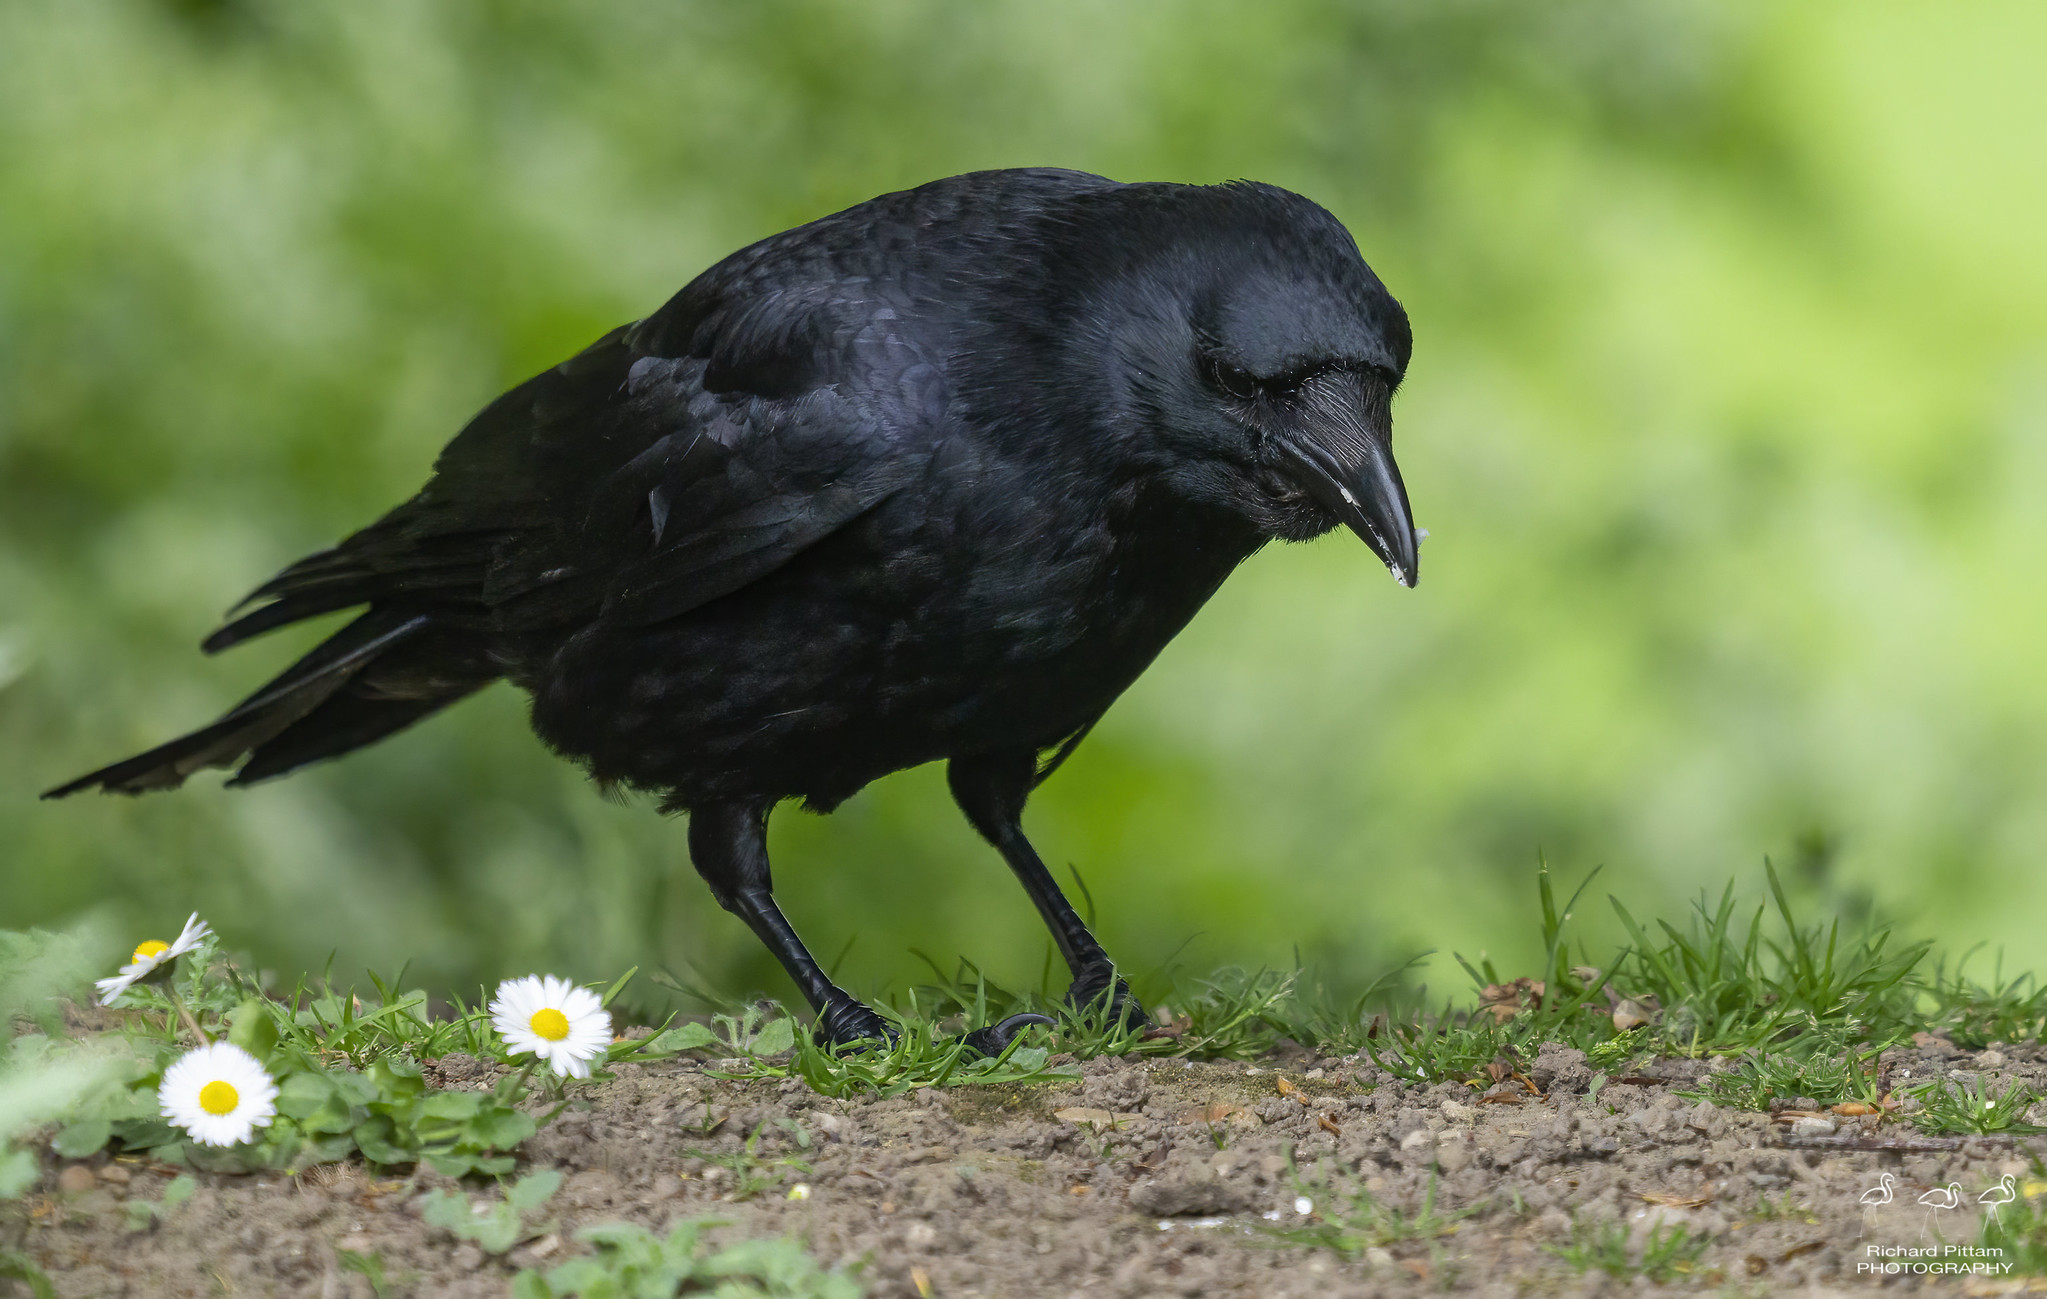 Carrion Crow - 10,000 ISO